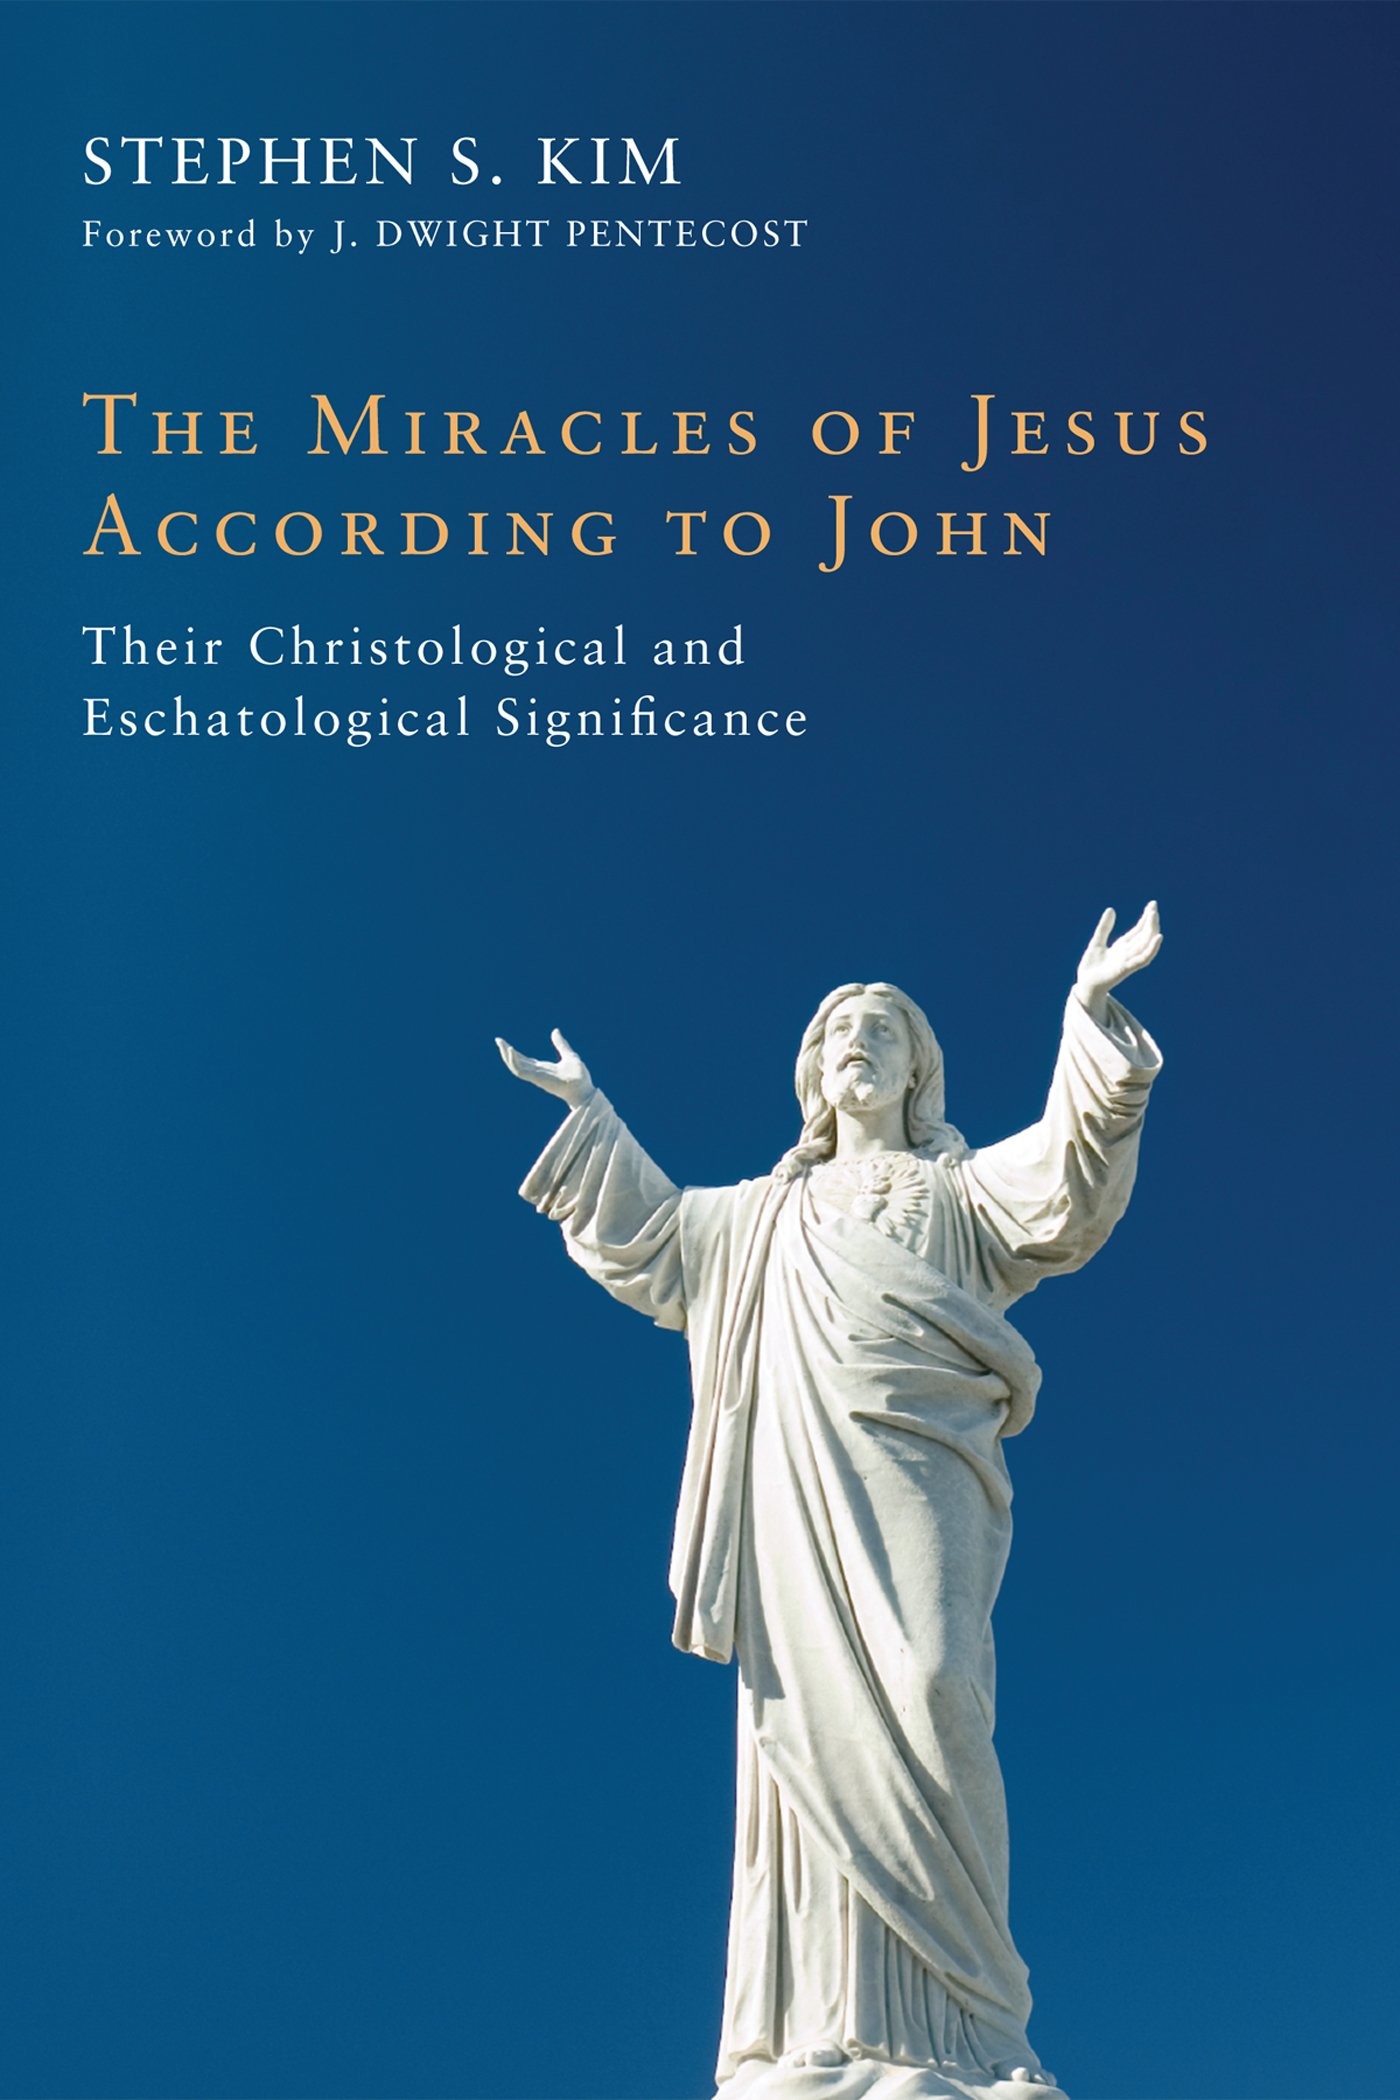 The Miracles of Jesus According to John: Their Christological and Eschatological Significance